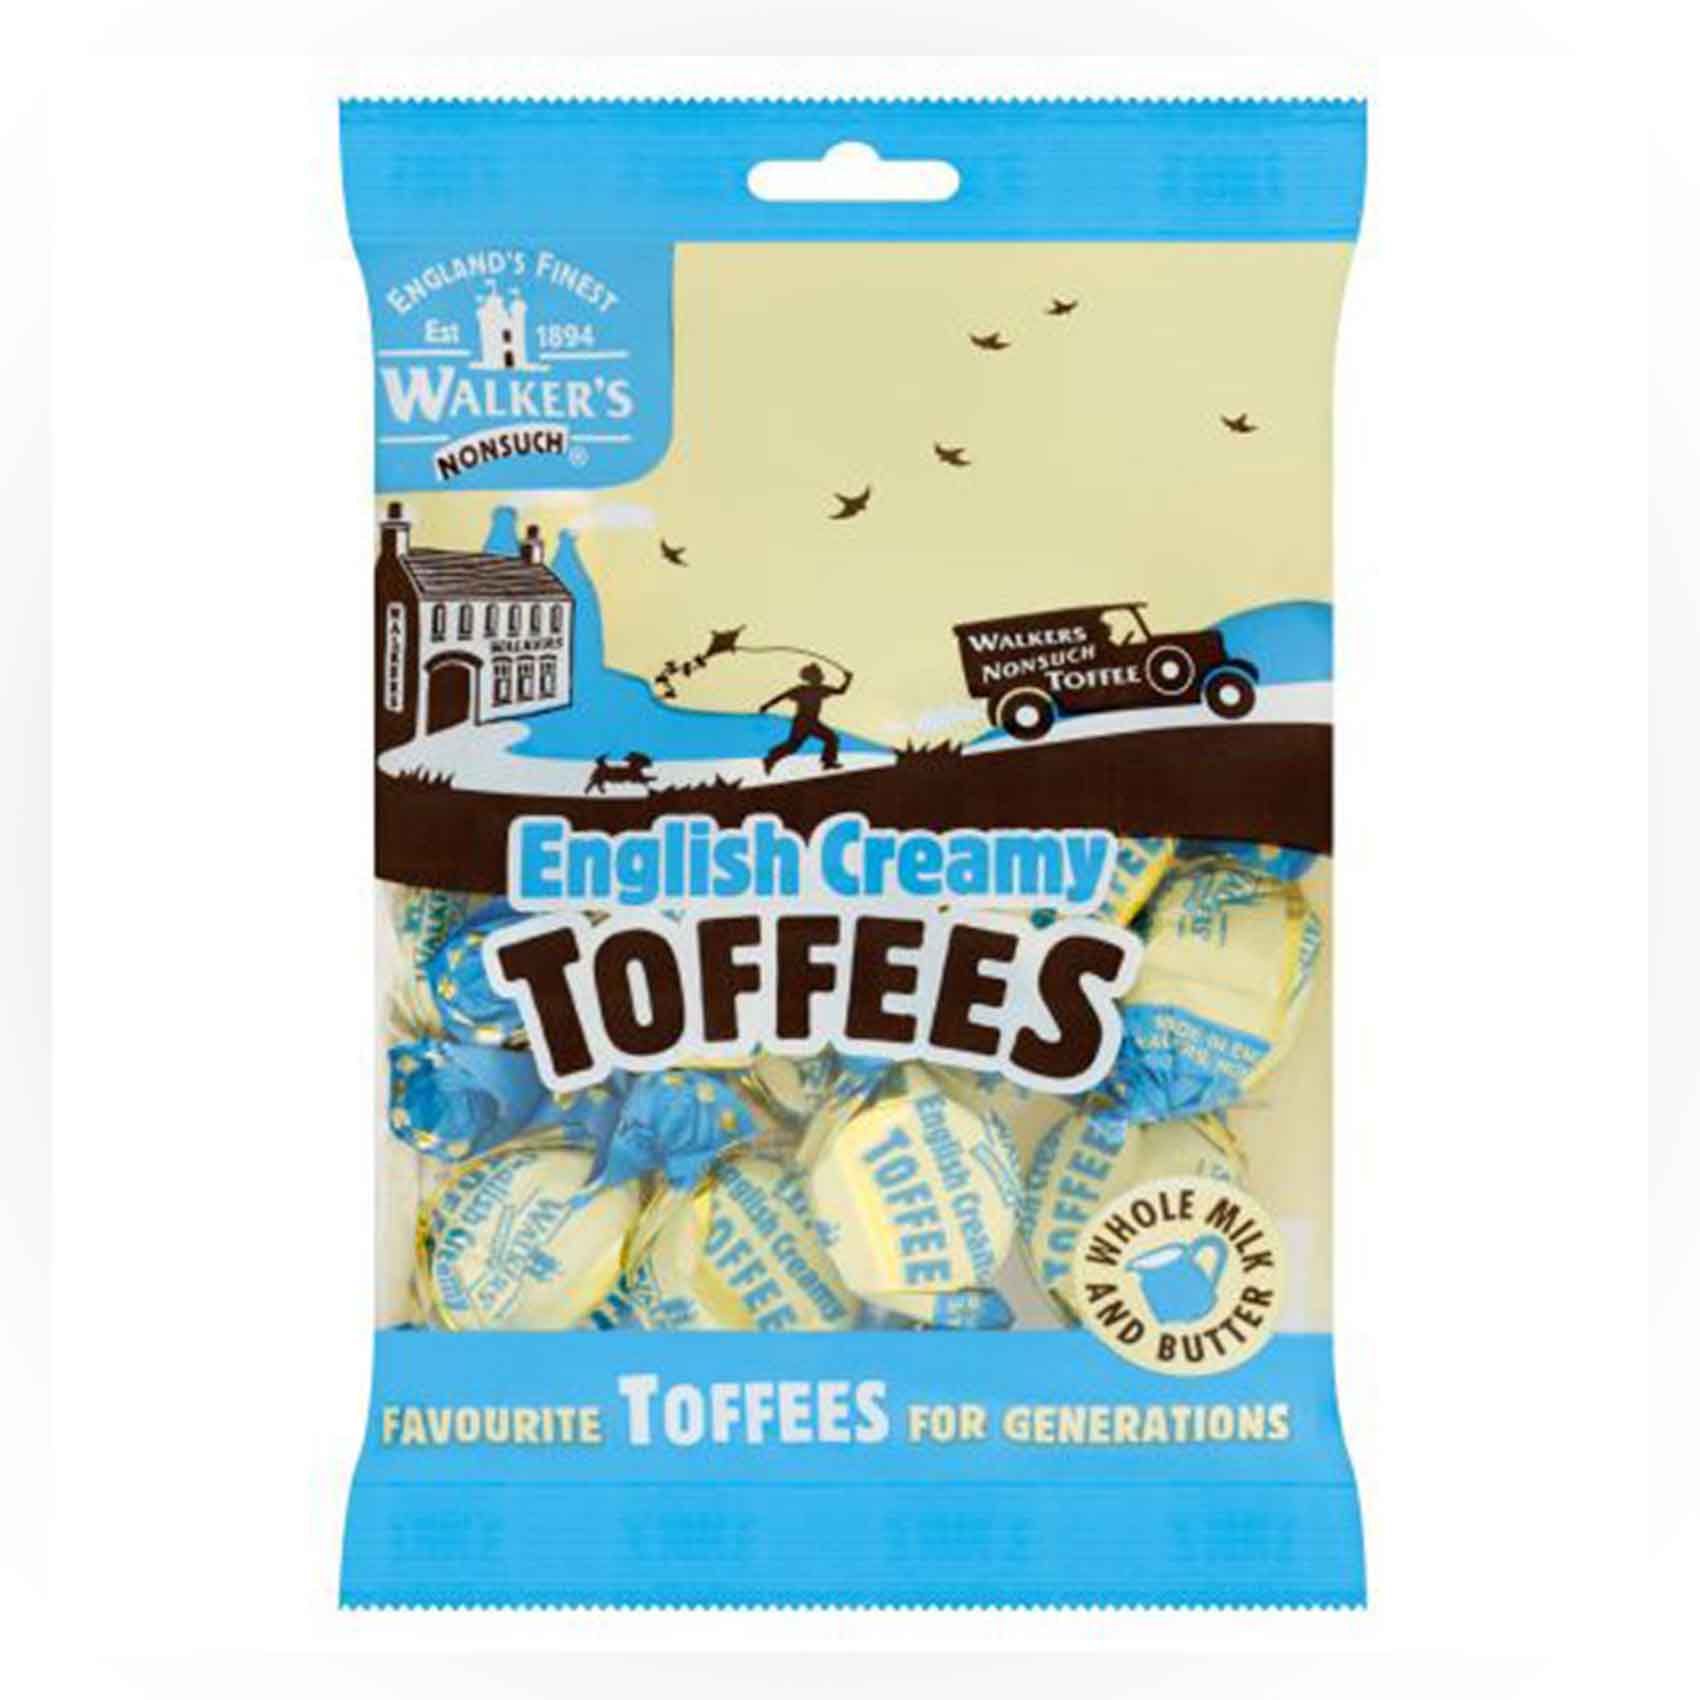 Walkers Nonsuch English Creamy Toffee 150g